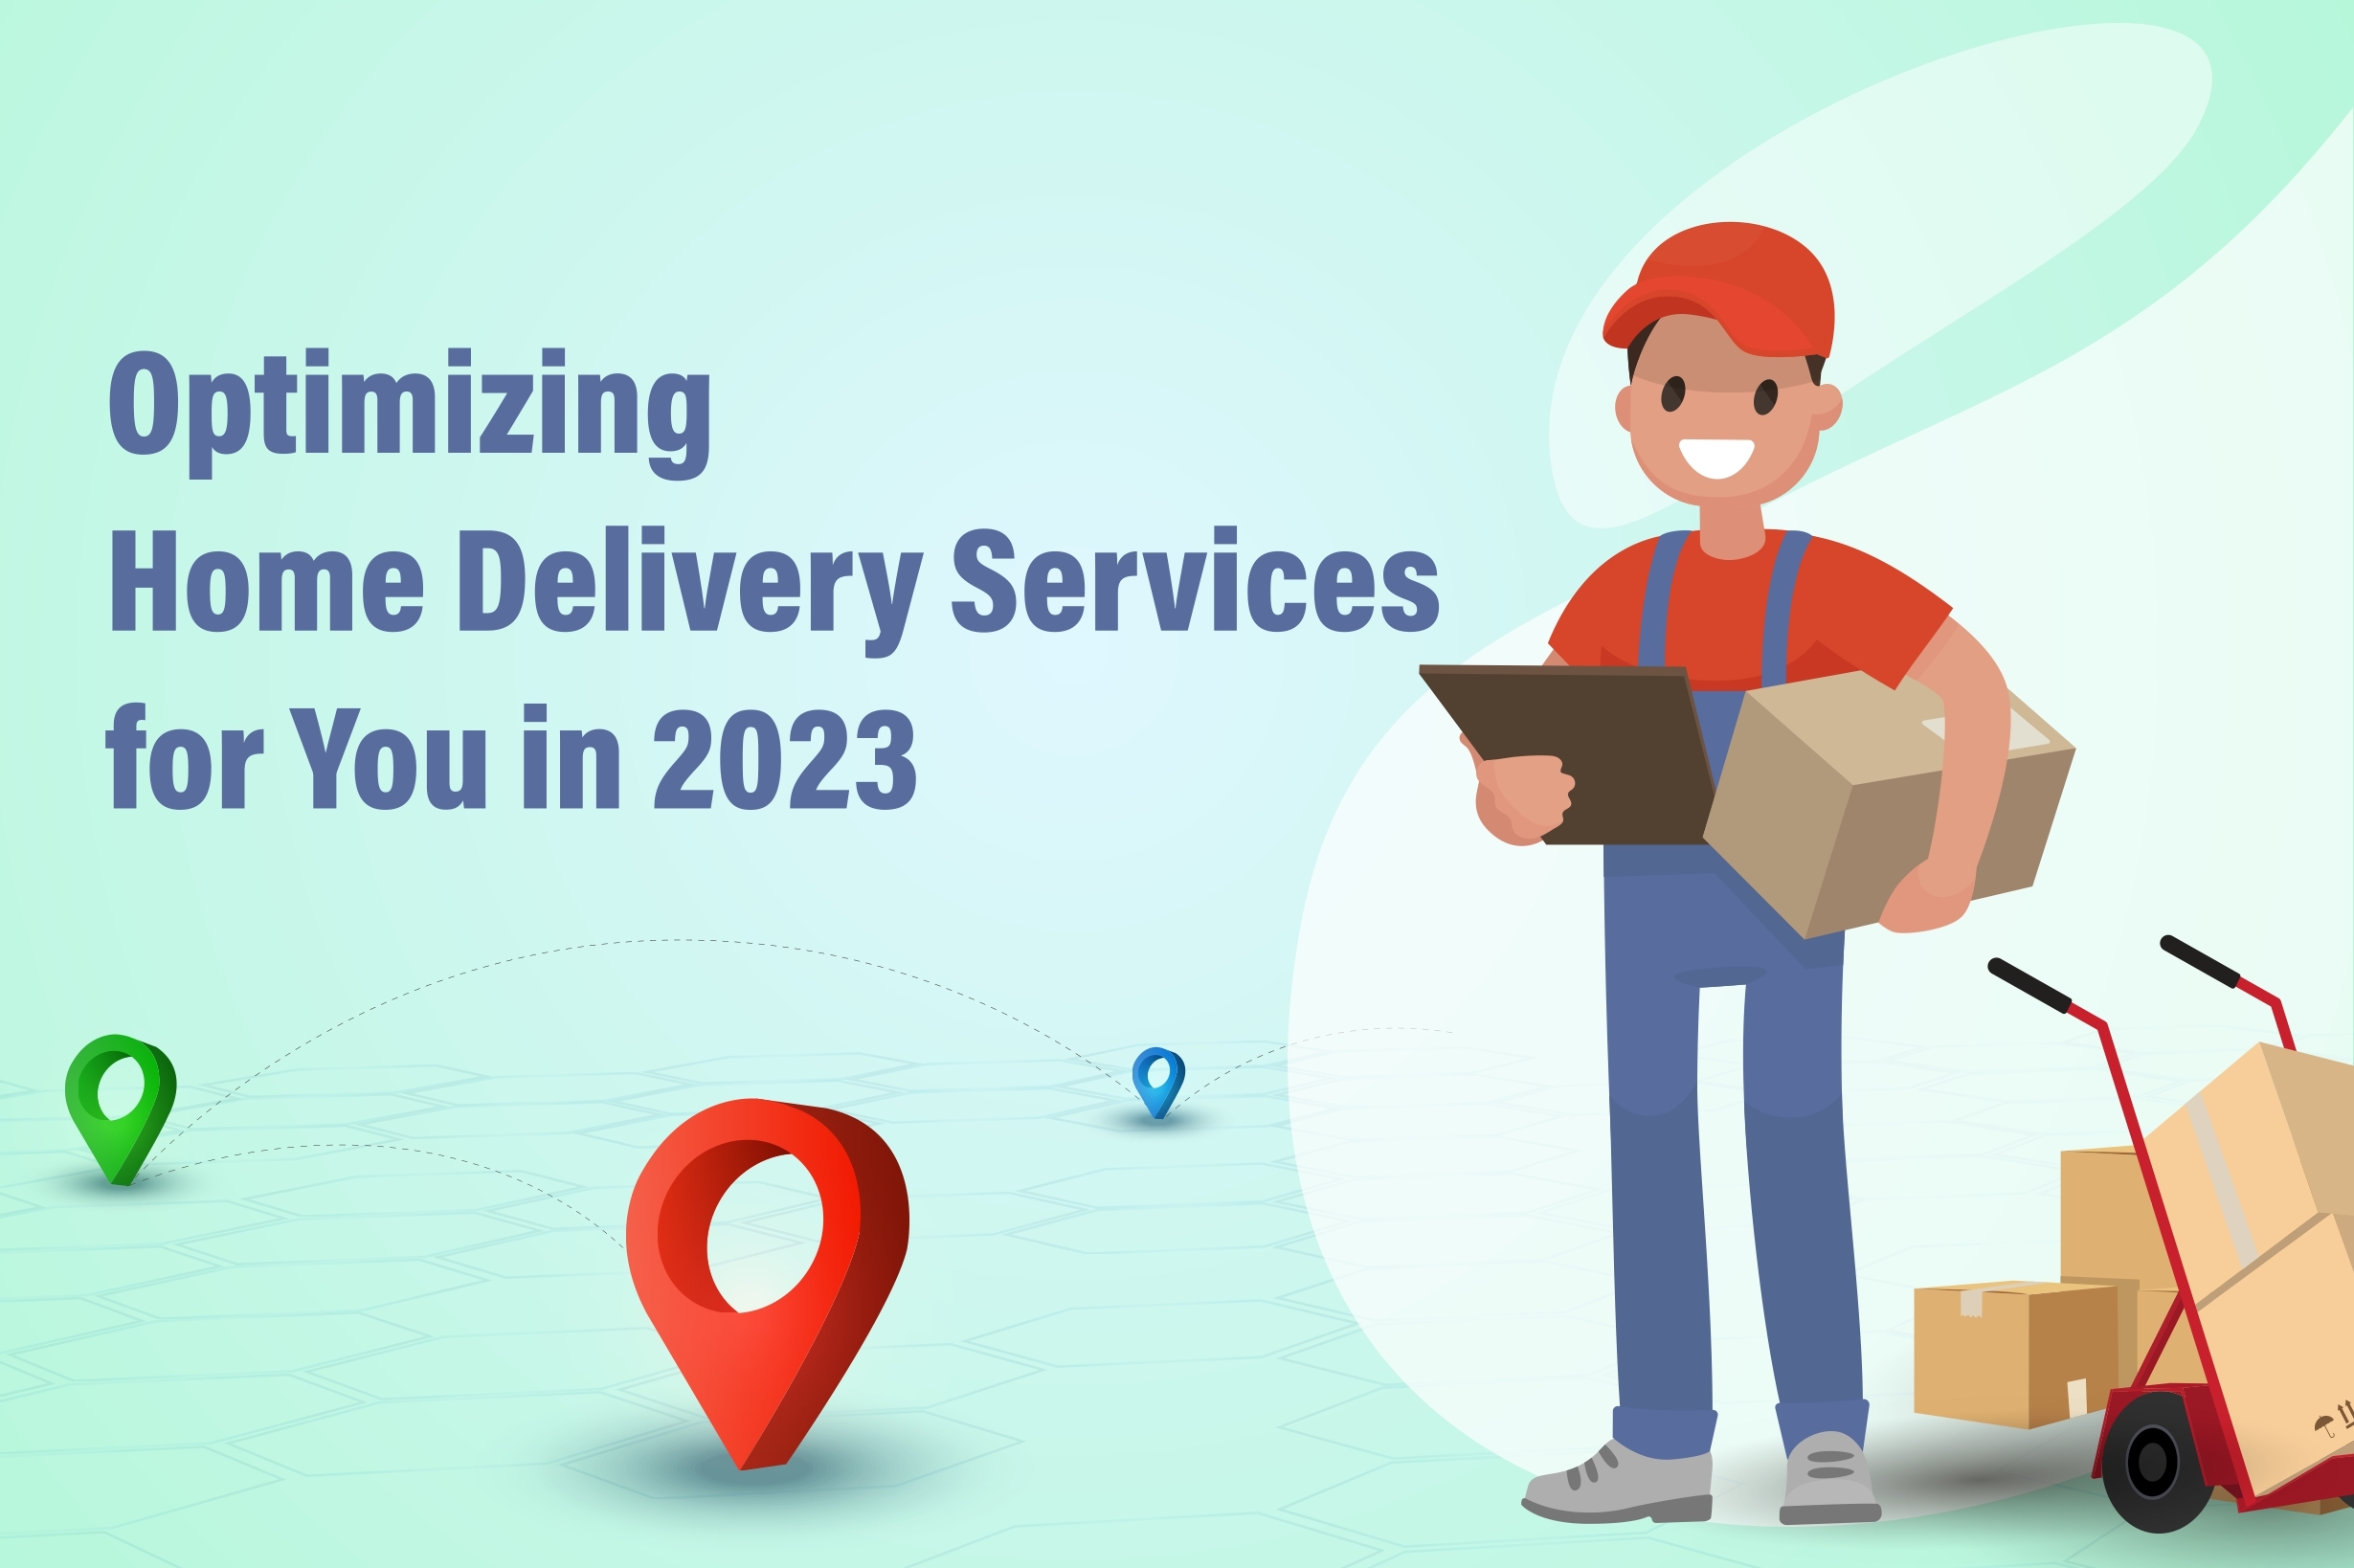 Optimizing Home Delivery Services for You in 2023